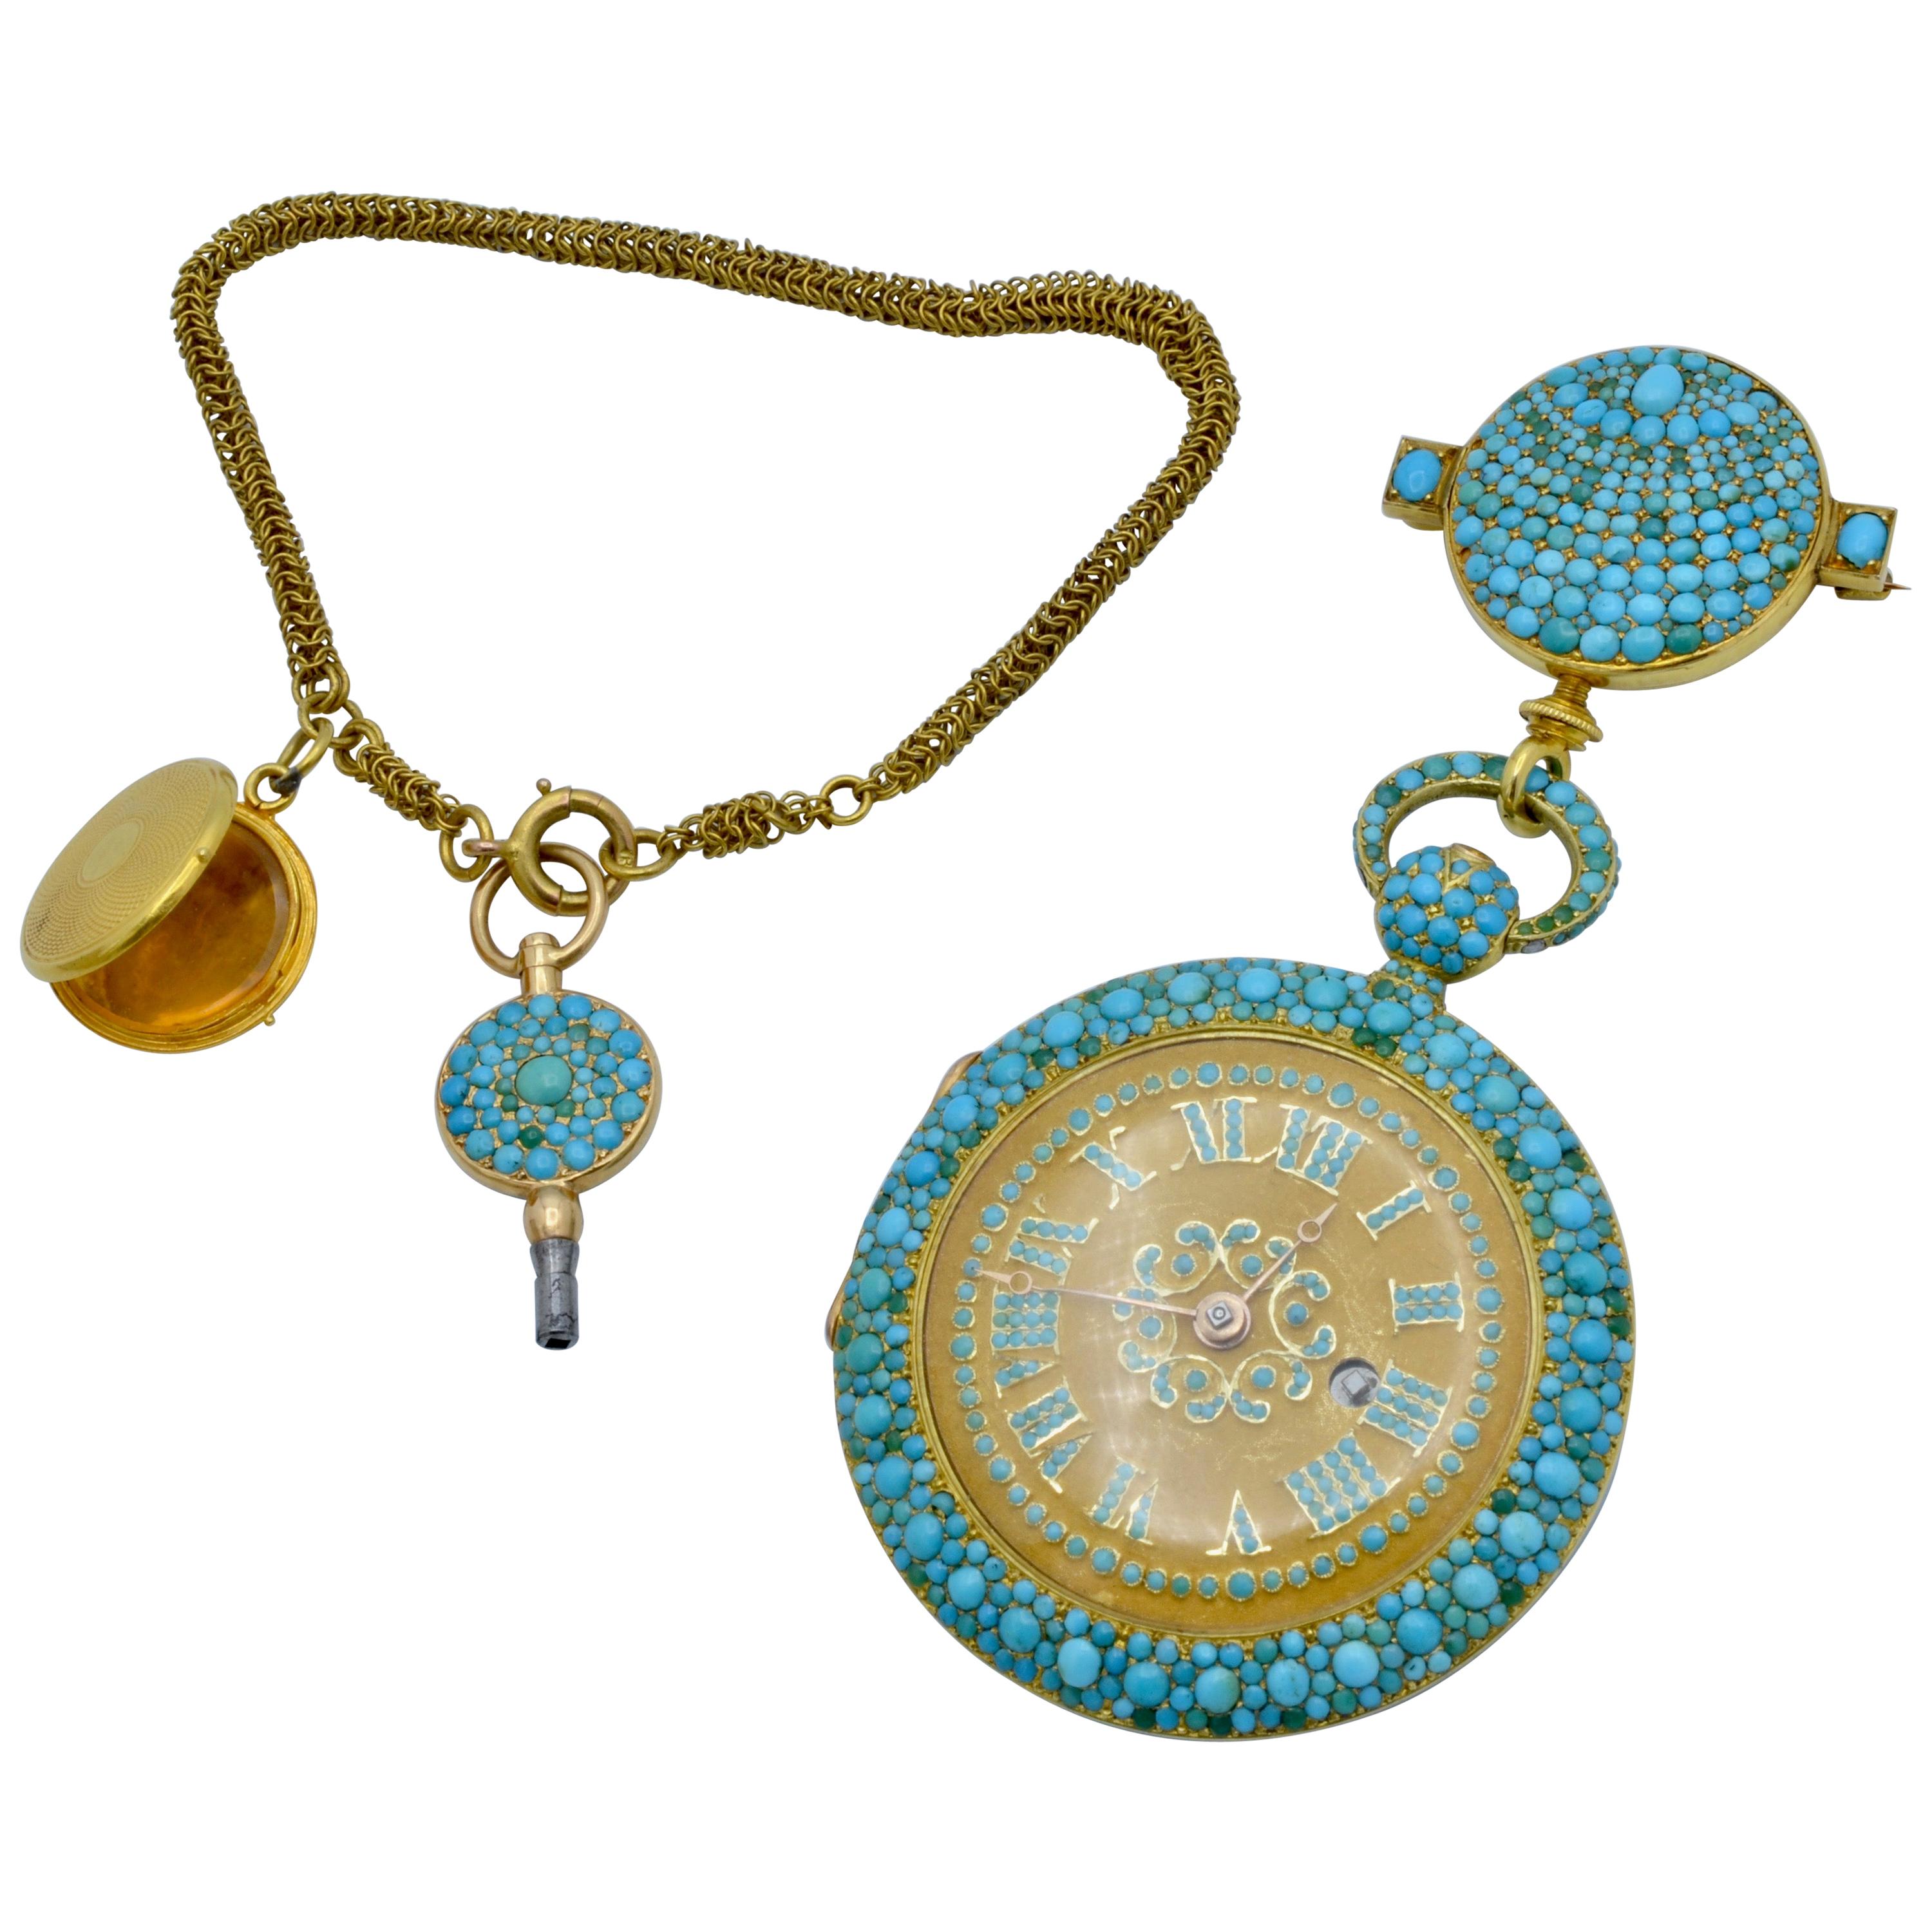 1830 Turquoise Lapel Gold Pocket Watch Bautte and Co with Chain and Locket